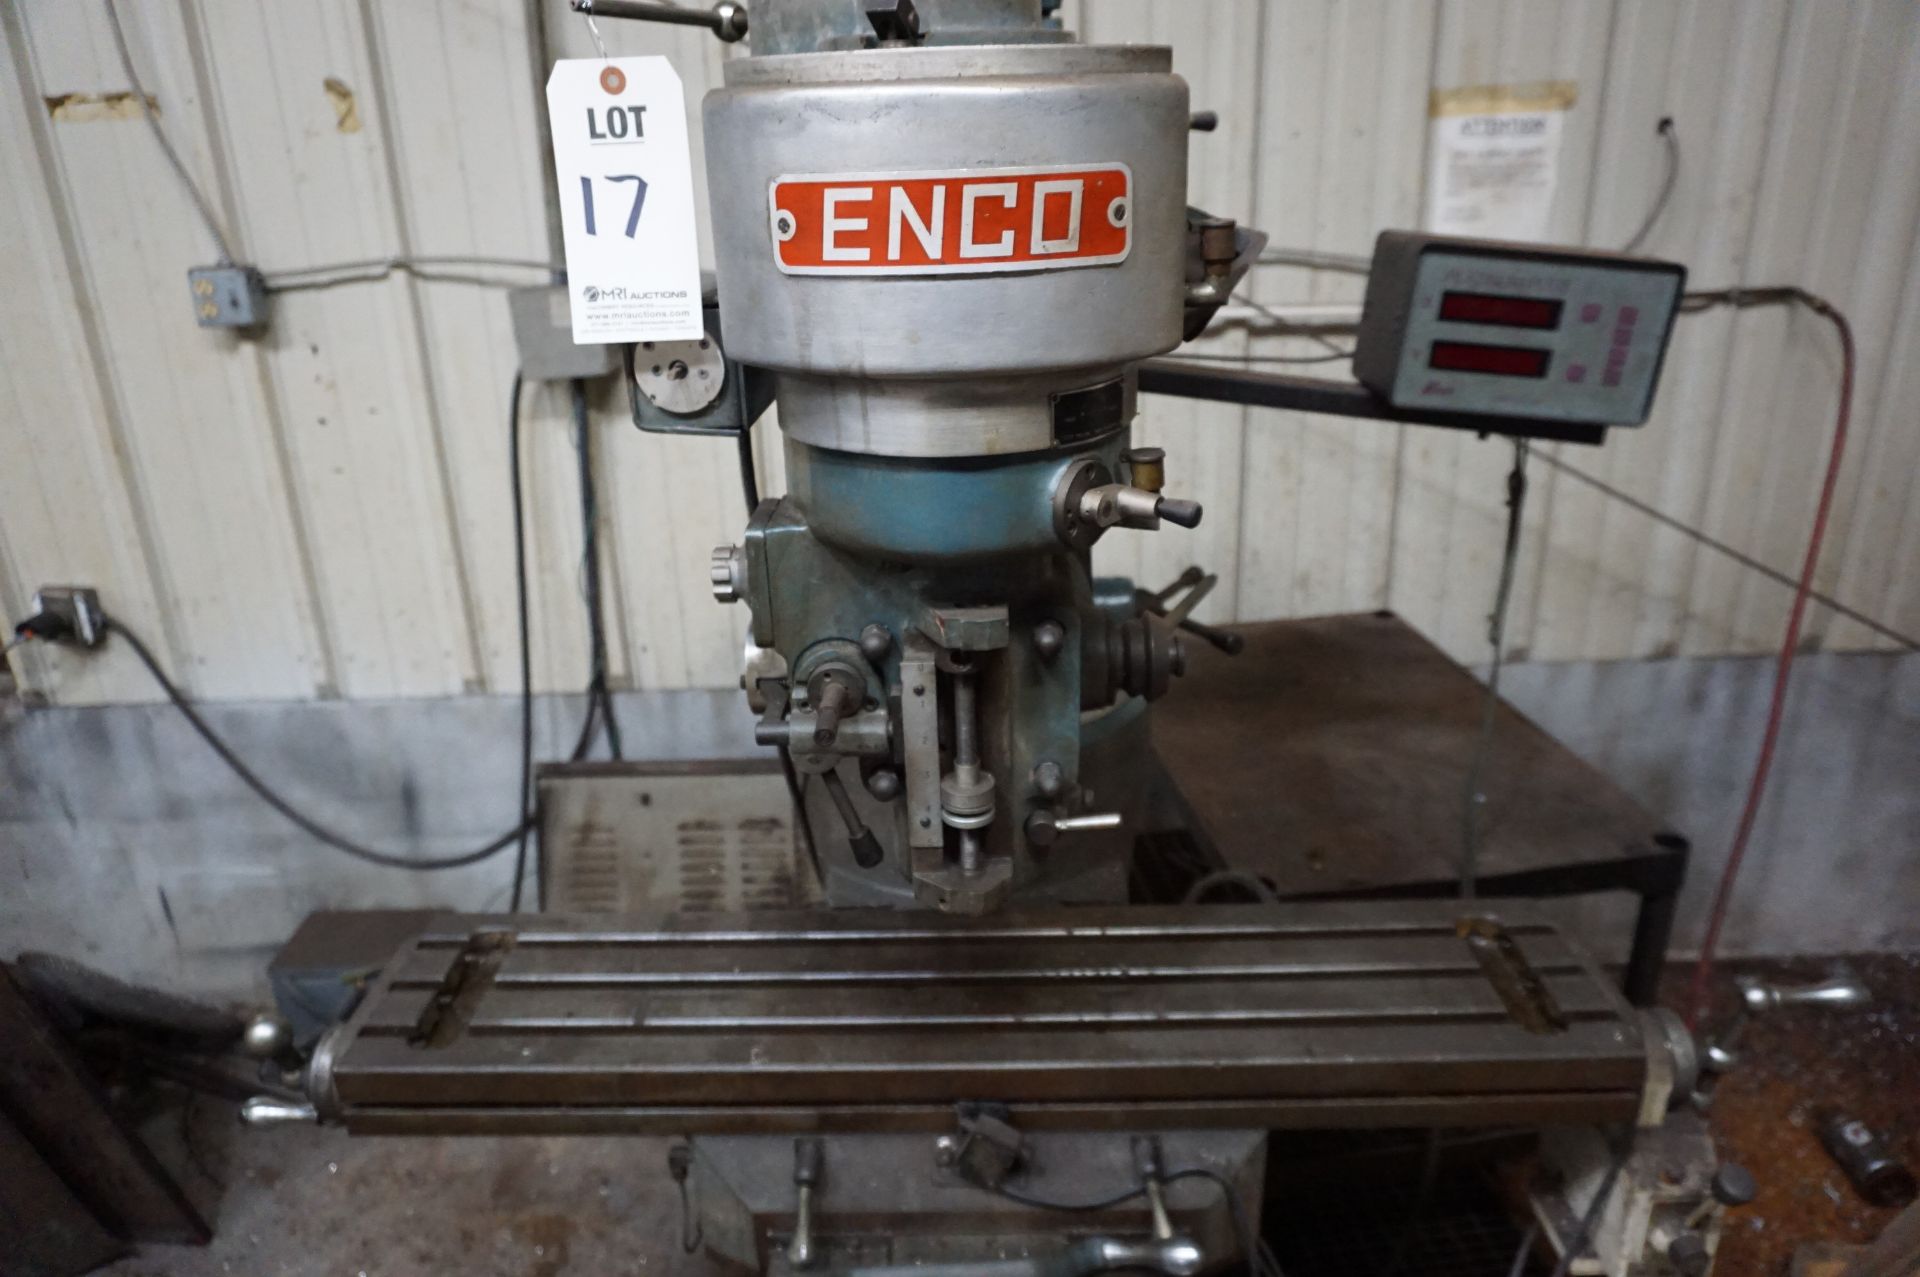 ENCO MANUAL KNEE MILL WITH ENCO DIGITAL READOUT AND MILL TABLE POWER FEED - Image 2 of 5